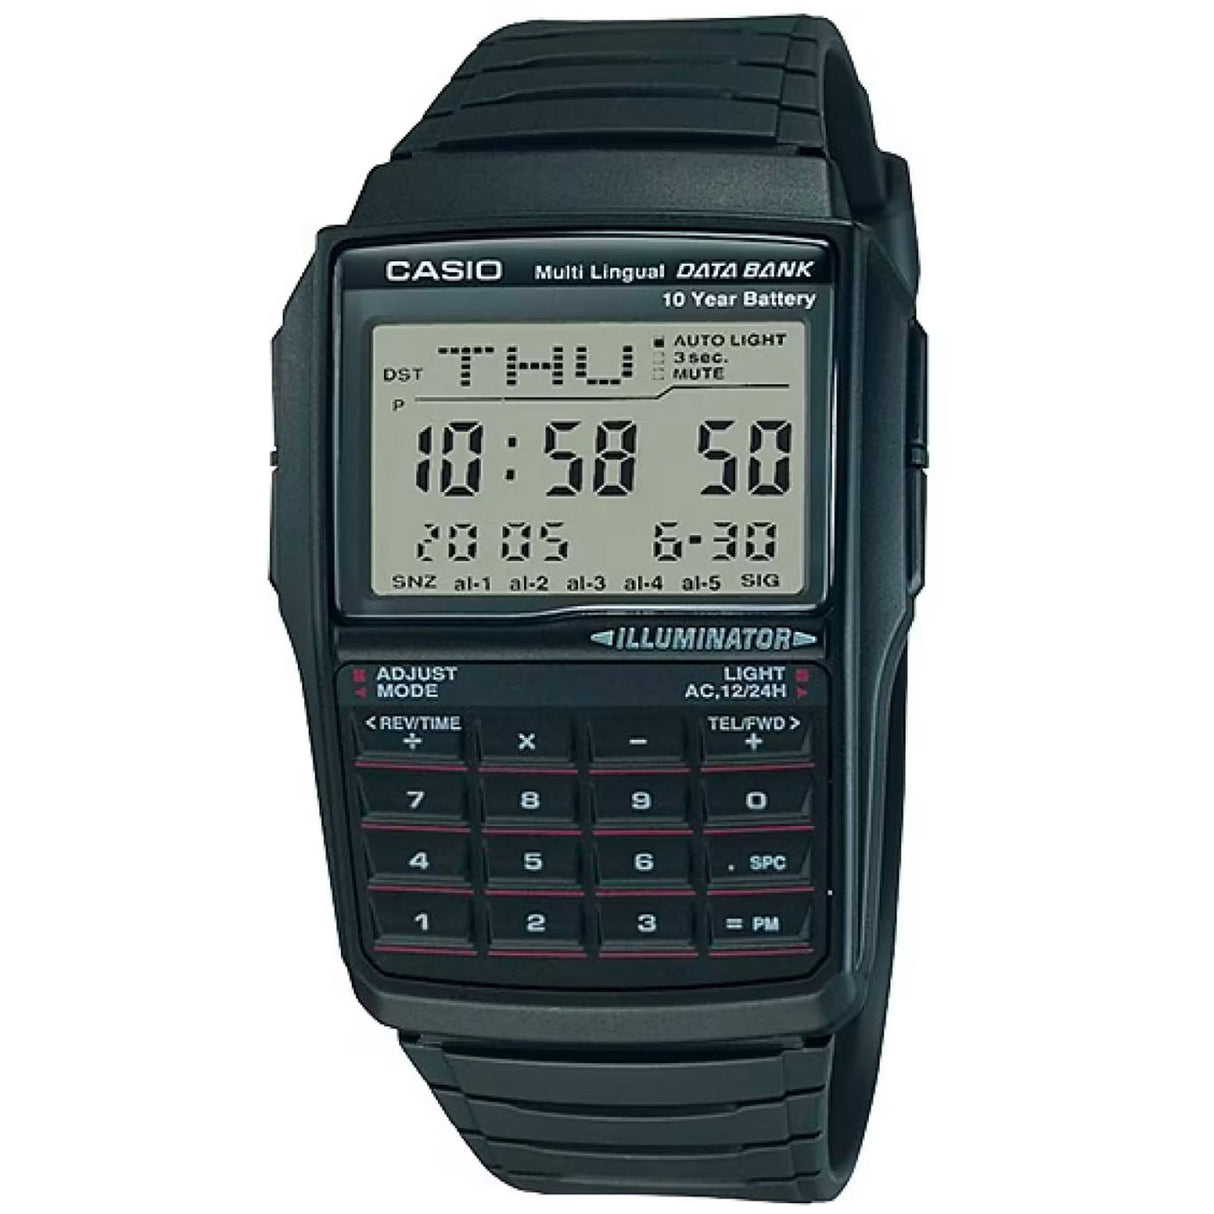 Casio Unisex Digital Watch Digital Display with Casio Logo 37mm Case Size Plastic Case & Strap Quartz Movement Easy to Read Display Everyday Functionality Comfortable & Lightweight Durable Unisex Design Original Packaging